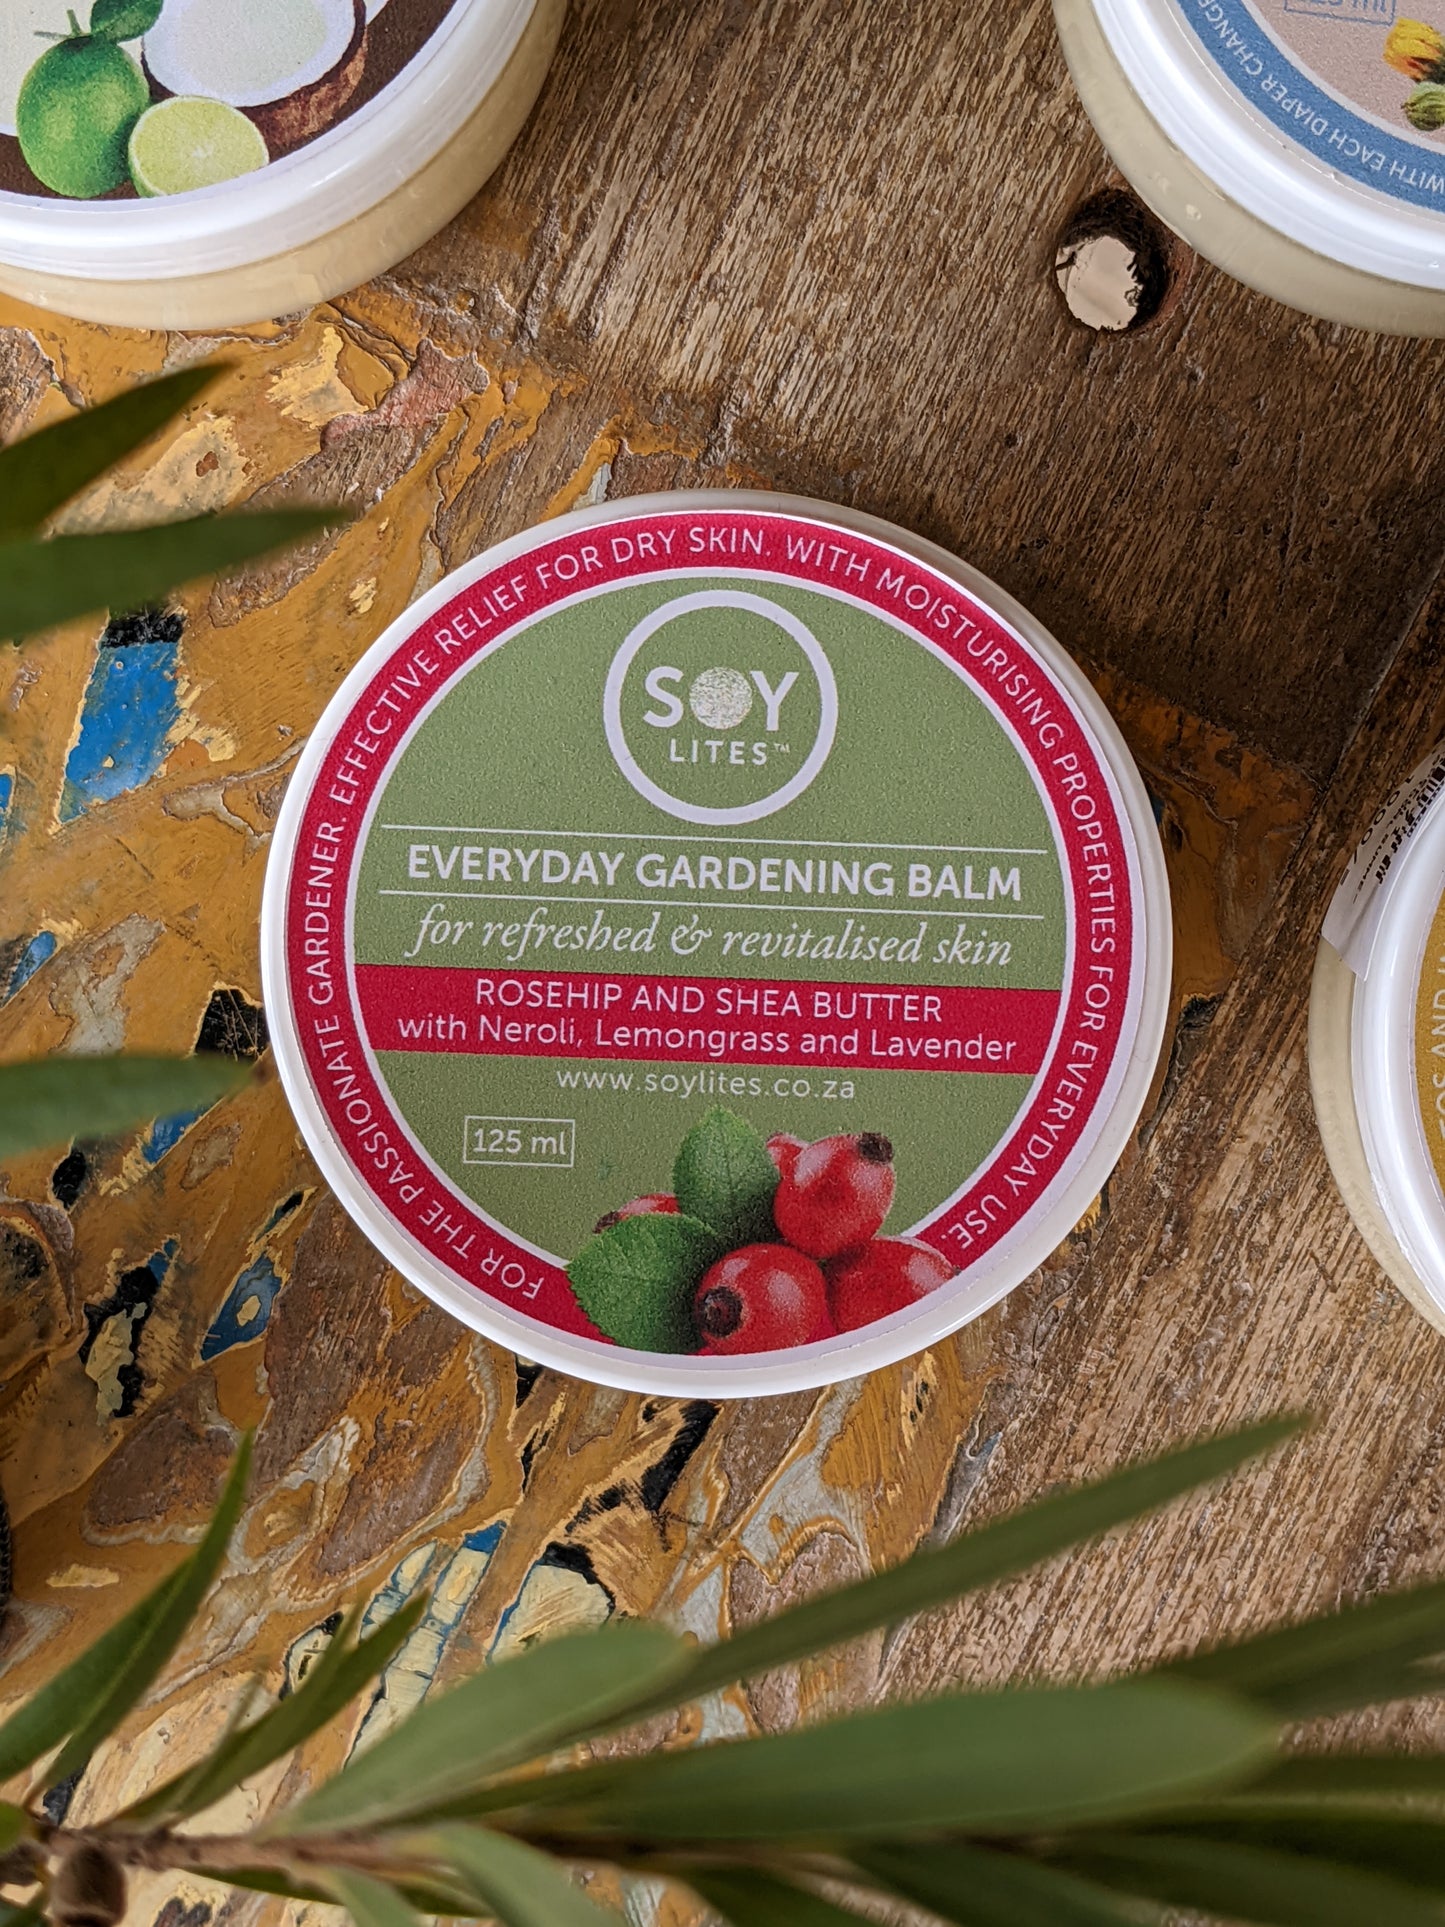 Soylites Everyday Gardening Balm - rosehip and shea butter